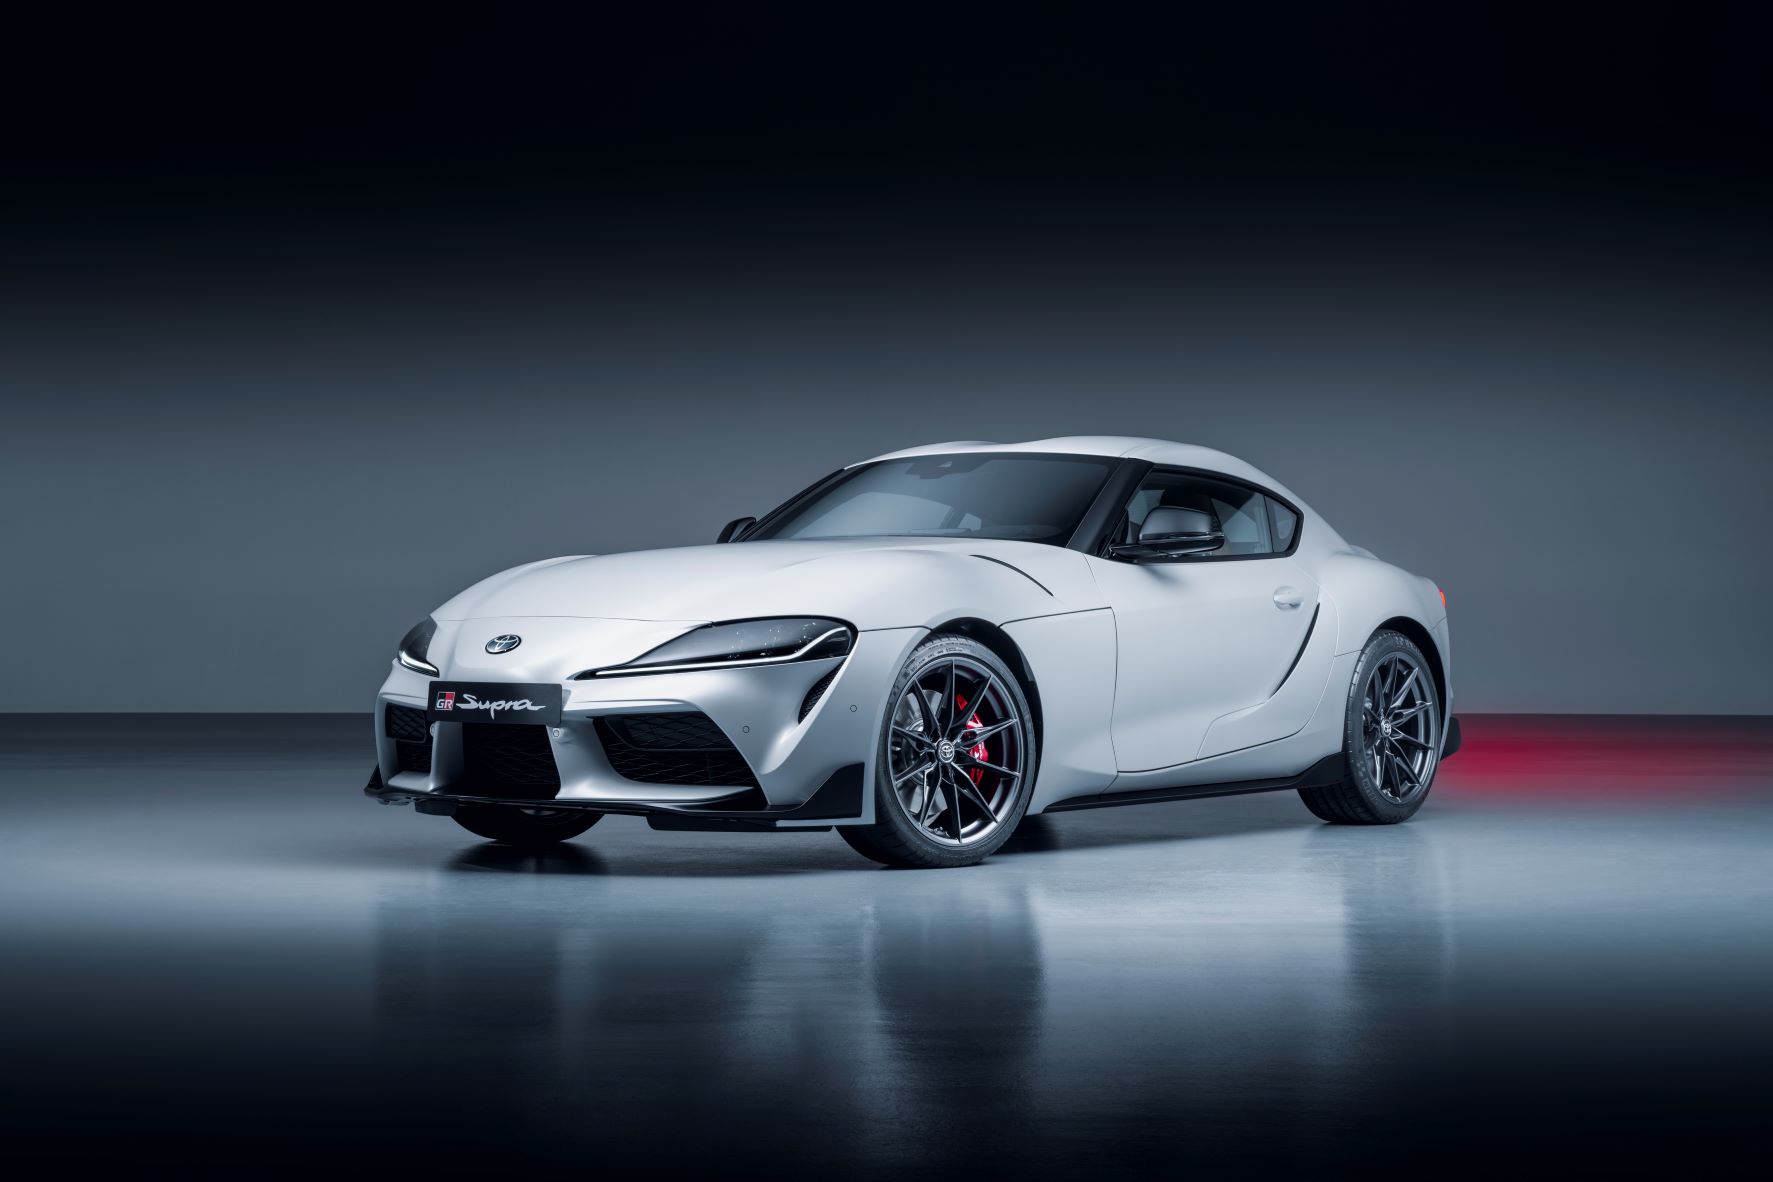 Front three quarters view of the new Toyota GR Supra